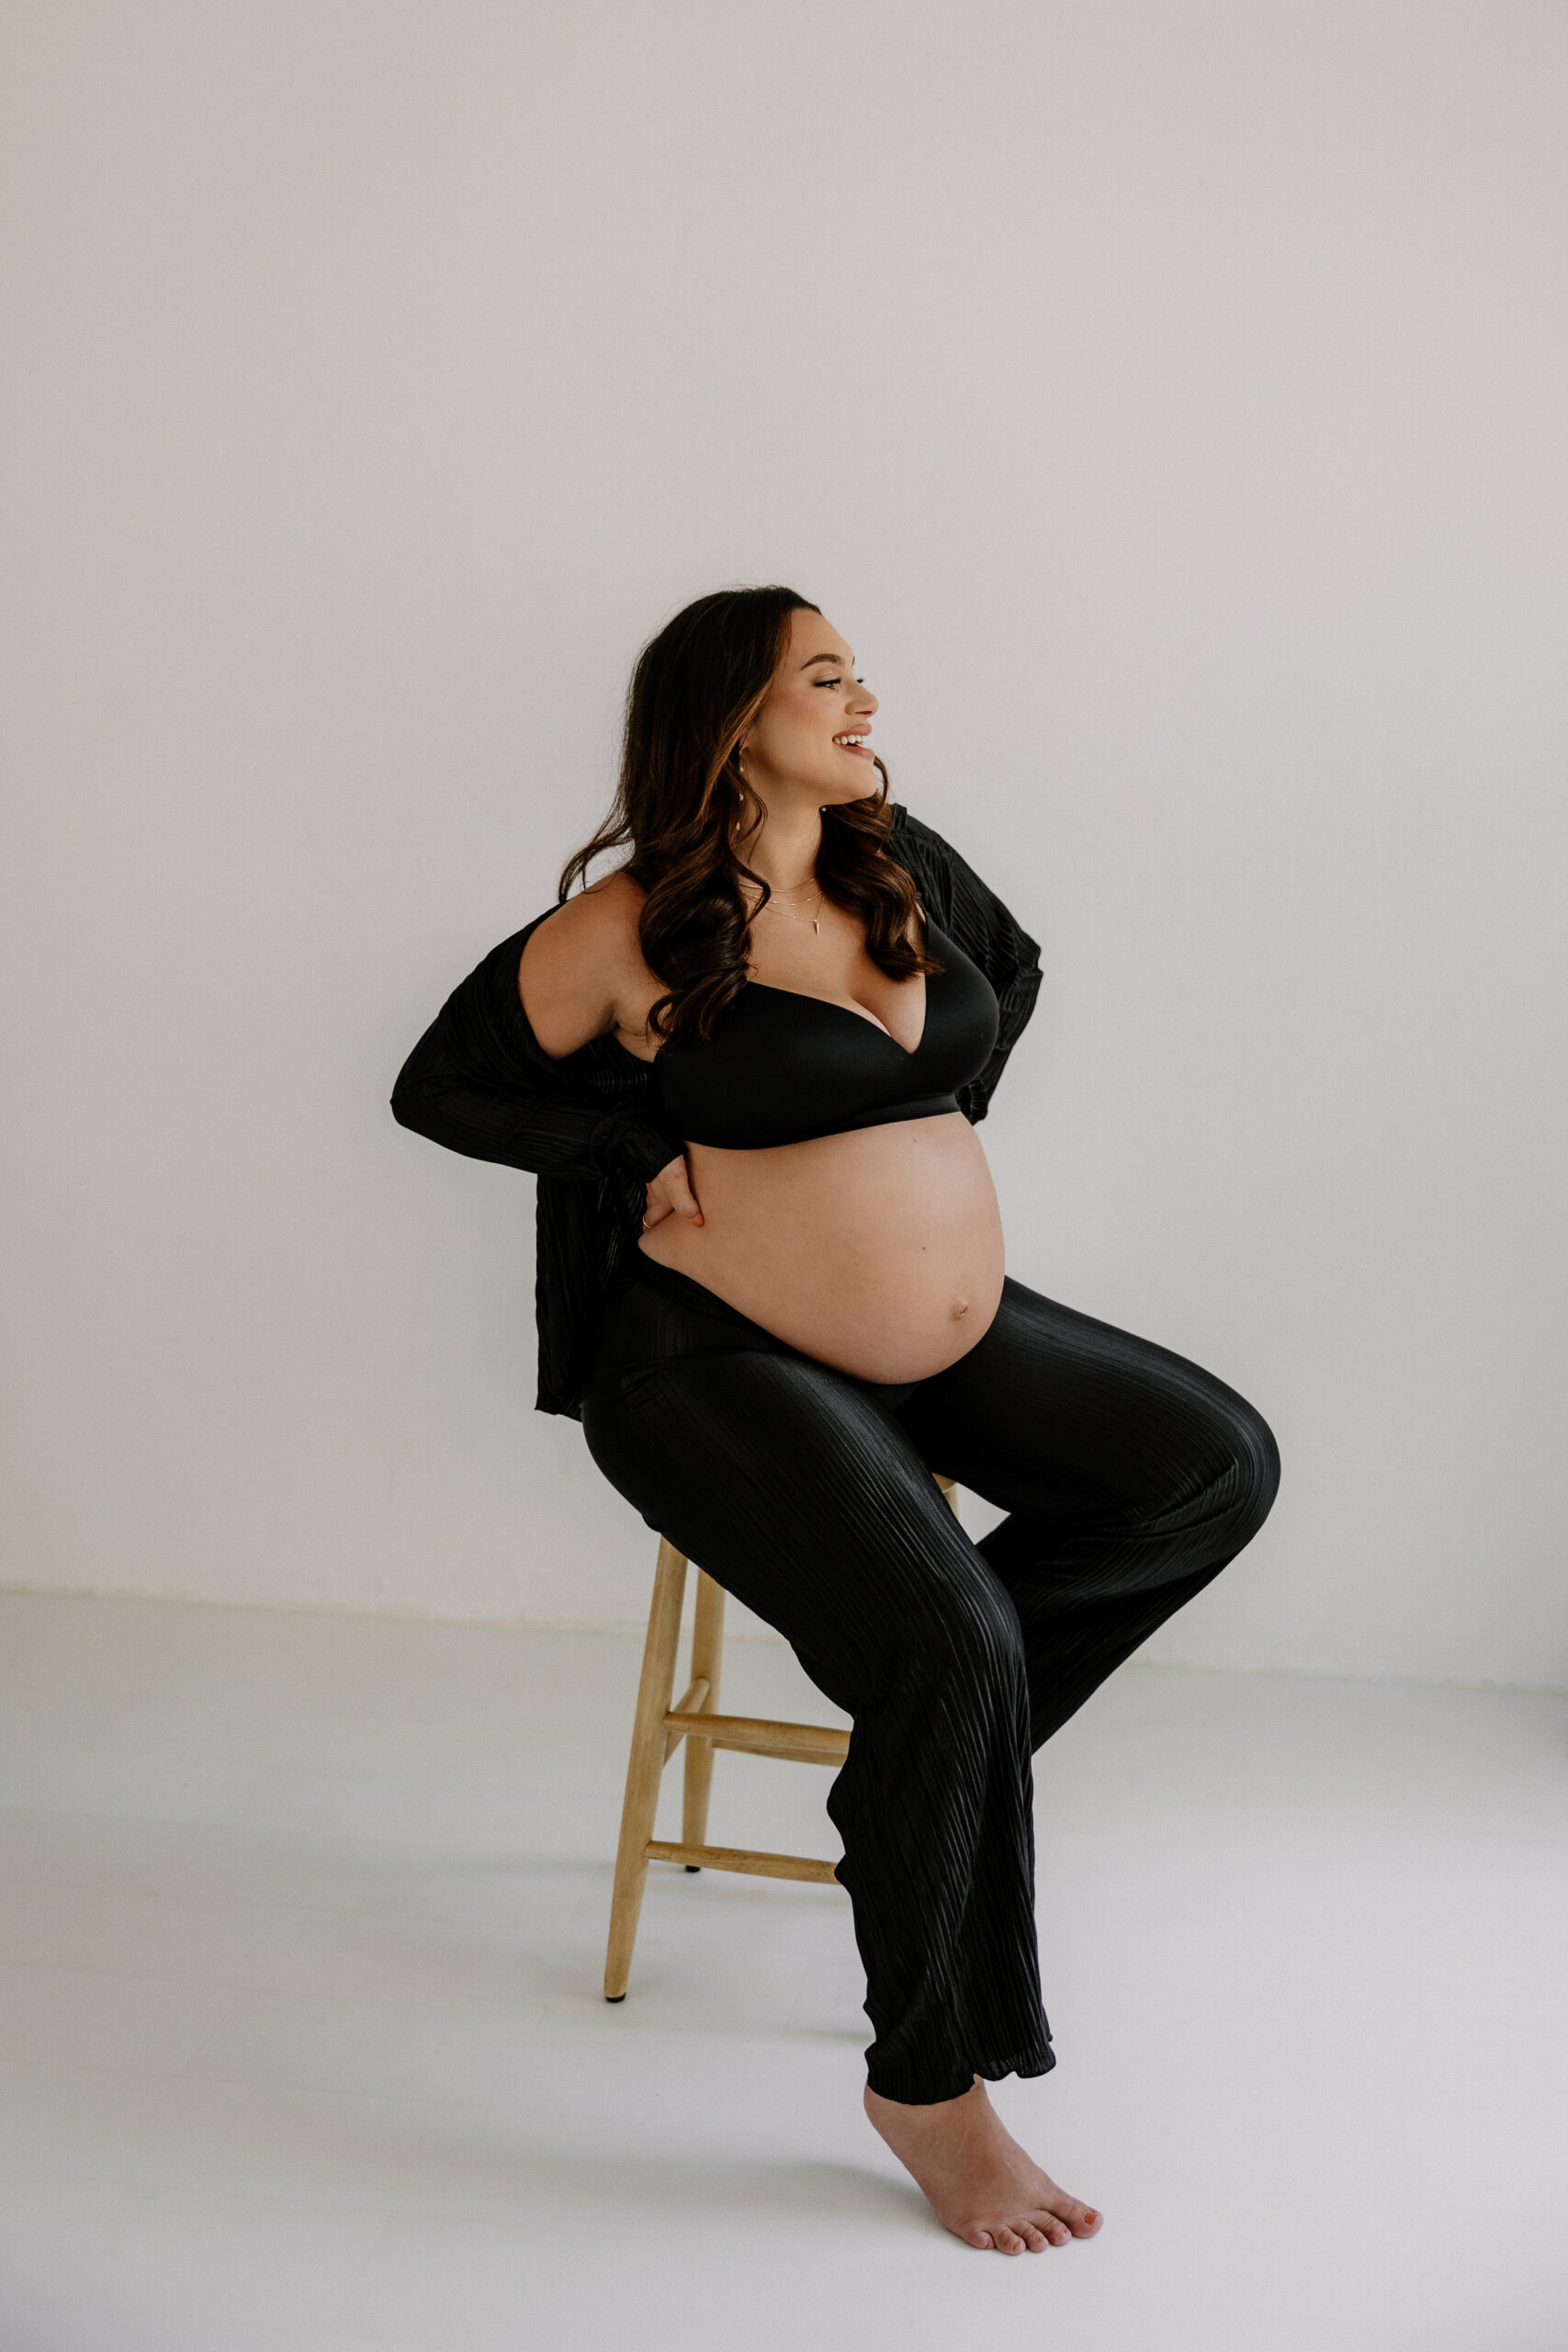 pregnant woman sitting on a stool and smiling during editorial maternity photoshoot 